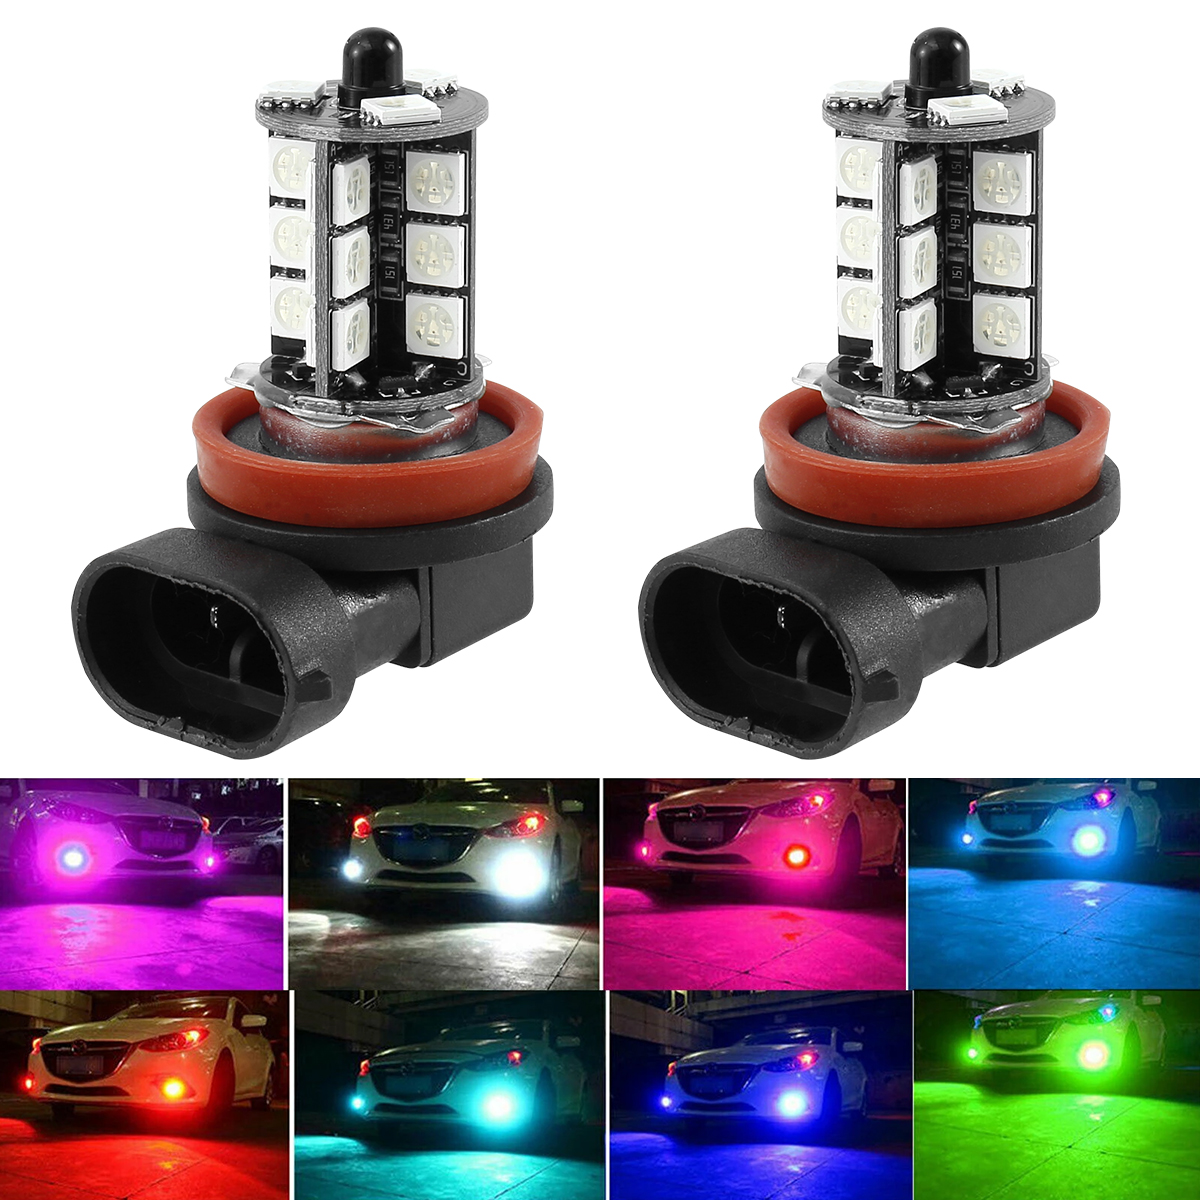 Harupink 2Pcs H11 H8 H16(JP) H9 LED RGB Fog Lights Bulb Amber Yellow White Multicolor 16 Color Changing Switch Kit Lamp Bulbs for Car Trucks Remote Control Switch 12V 5050SMD Replacement - image 1 of 7